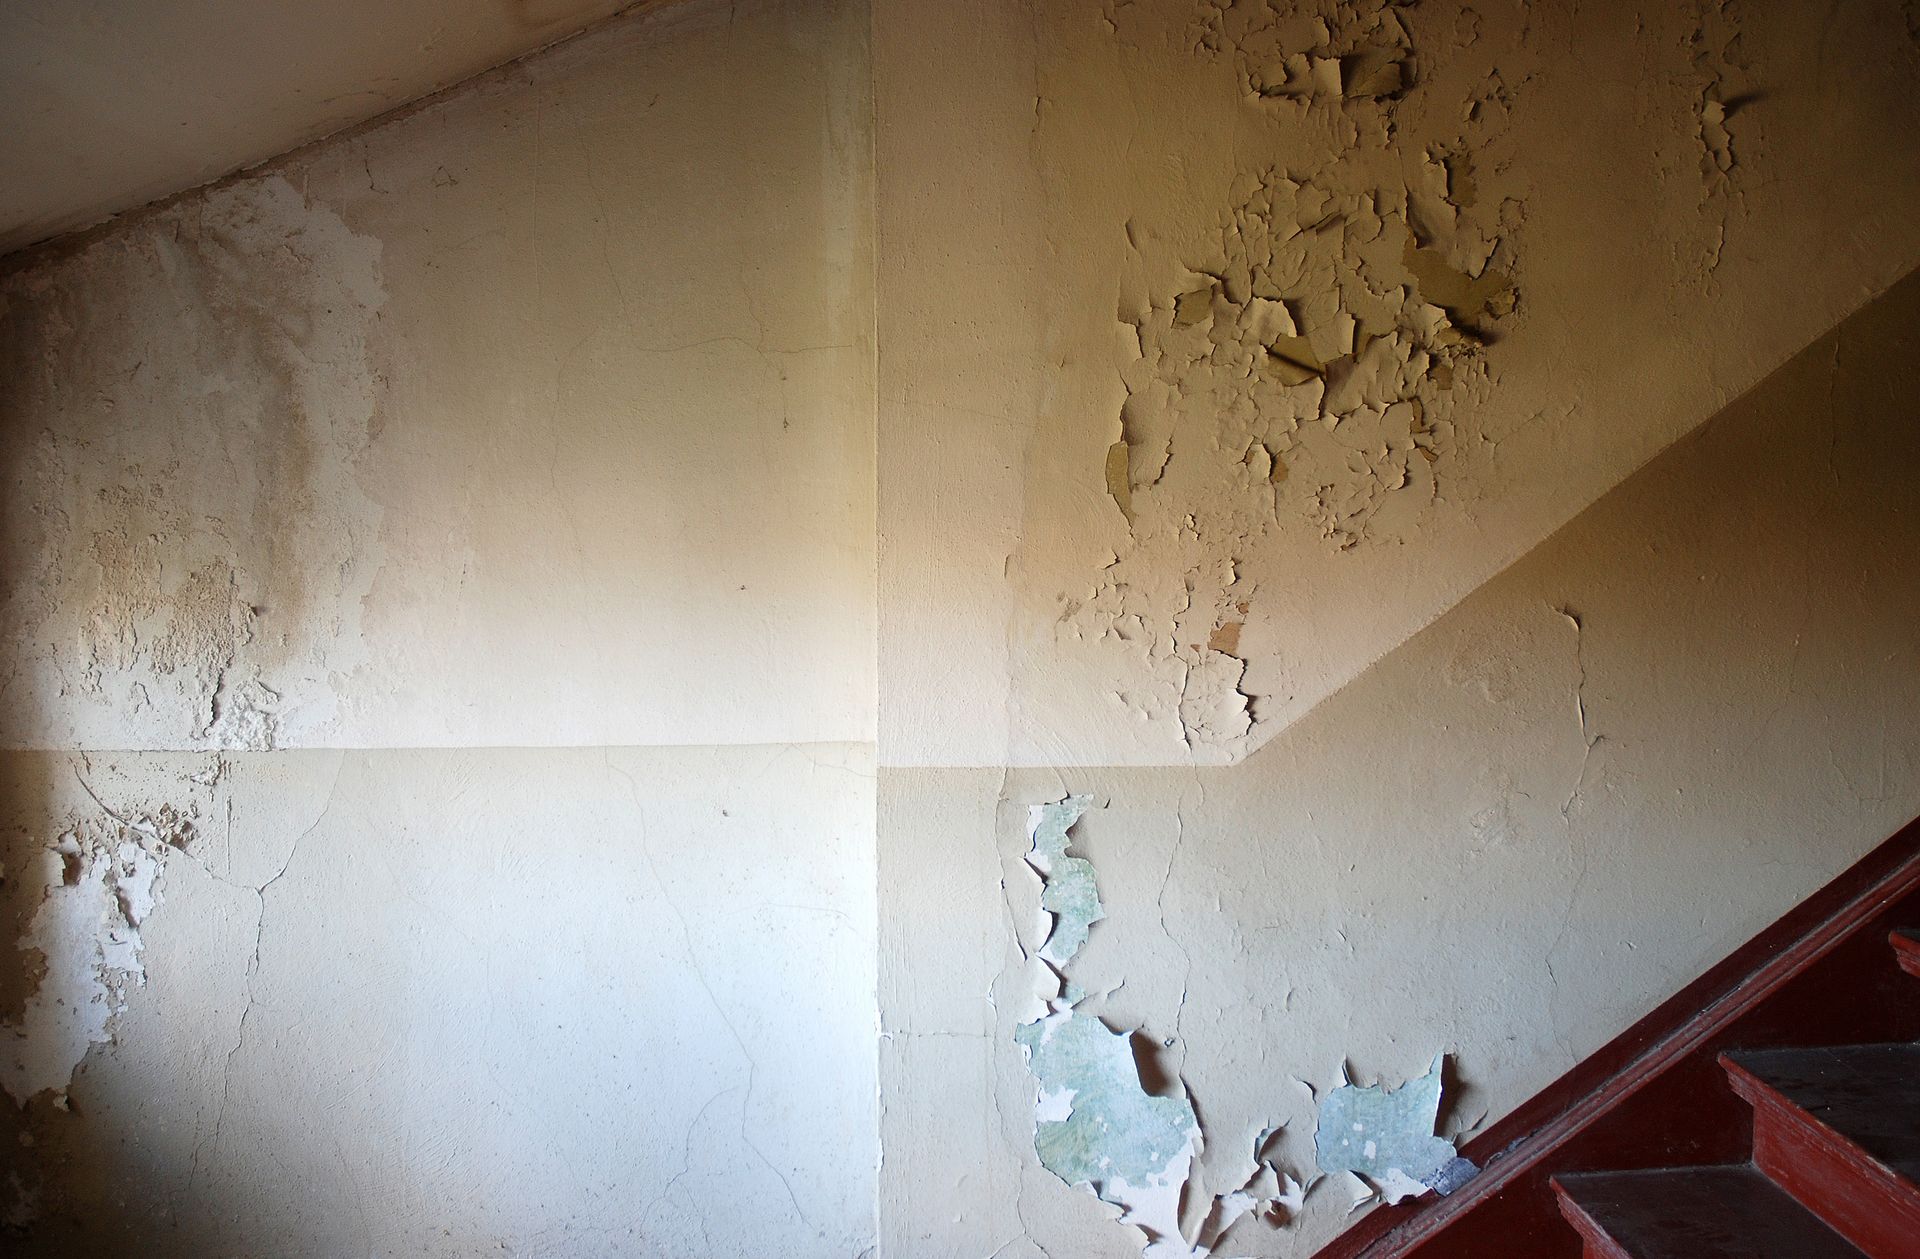 Interior of a building with water damage on the walls, showing peeling paint, discolored patches, and moisture stains.